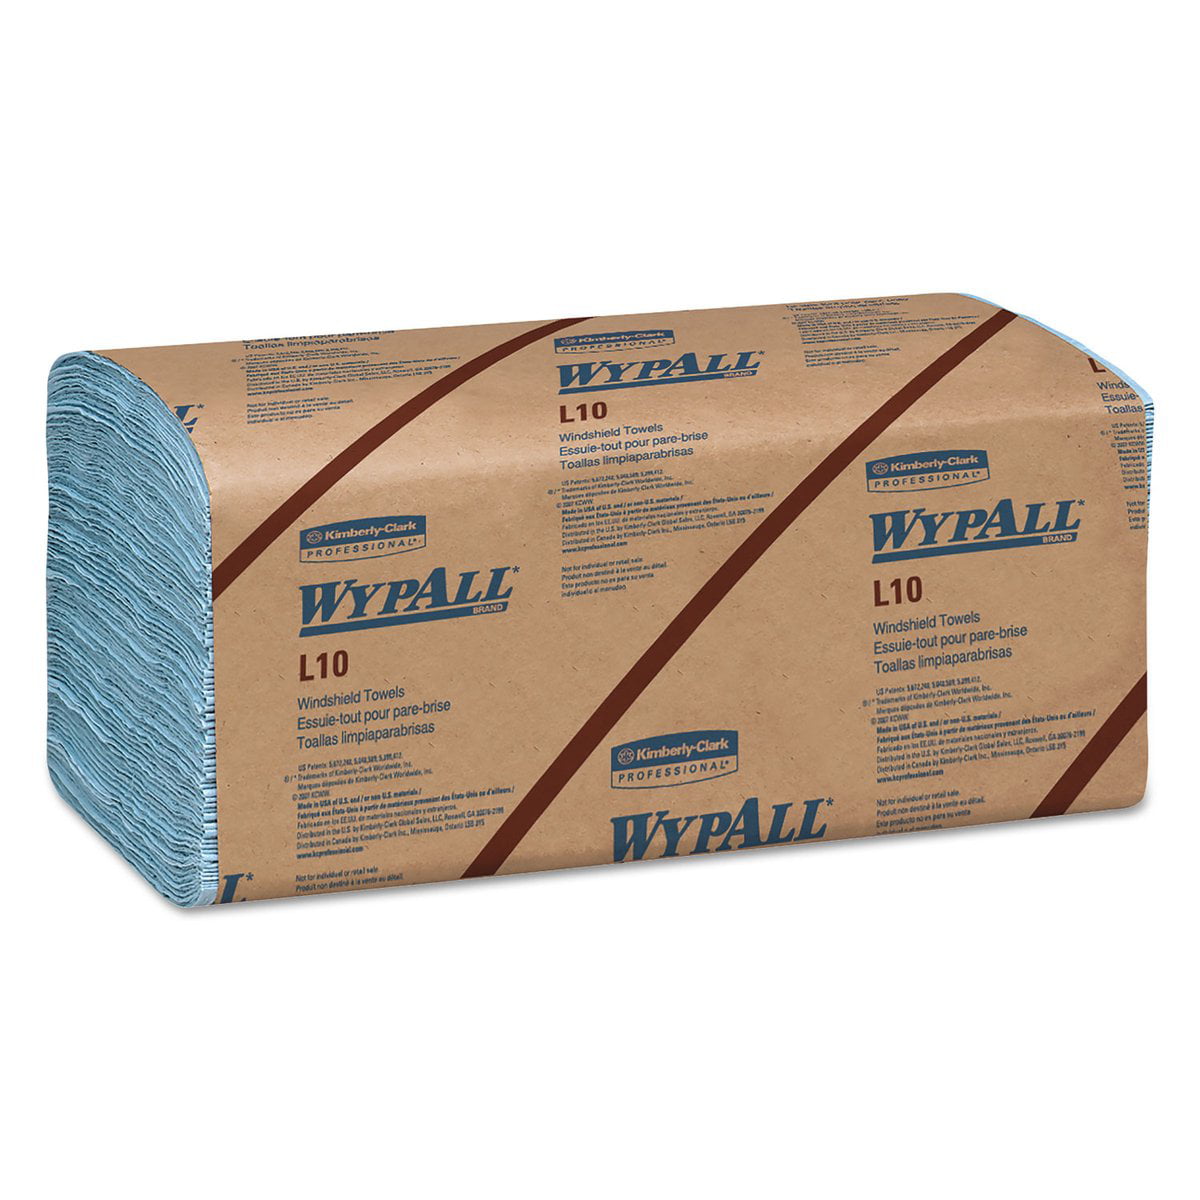 Kimberly-Clark Professional Wypall X70 Foodservice Towels KCC 05925 for sale online 